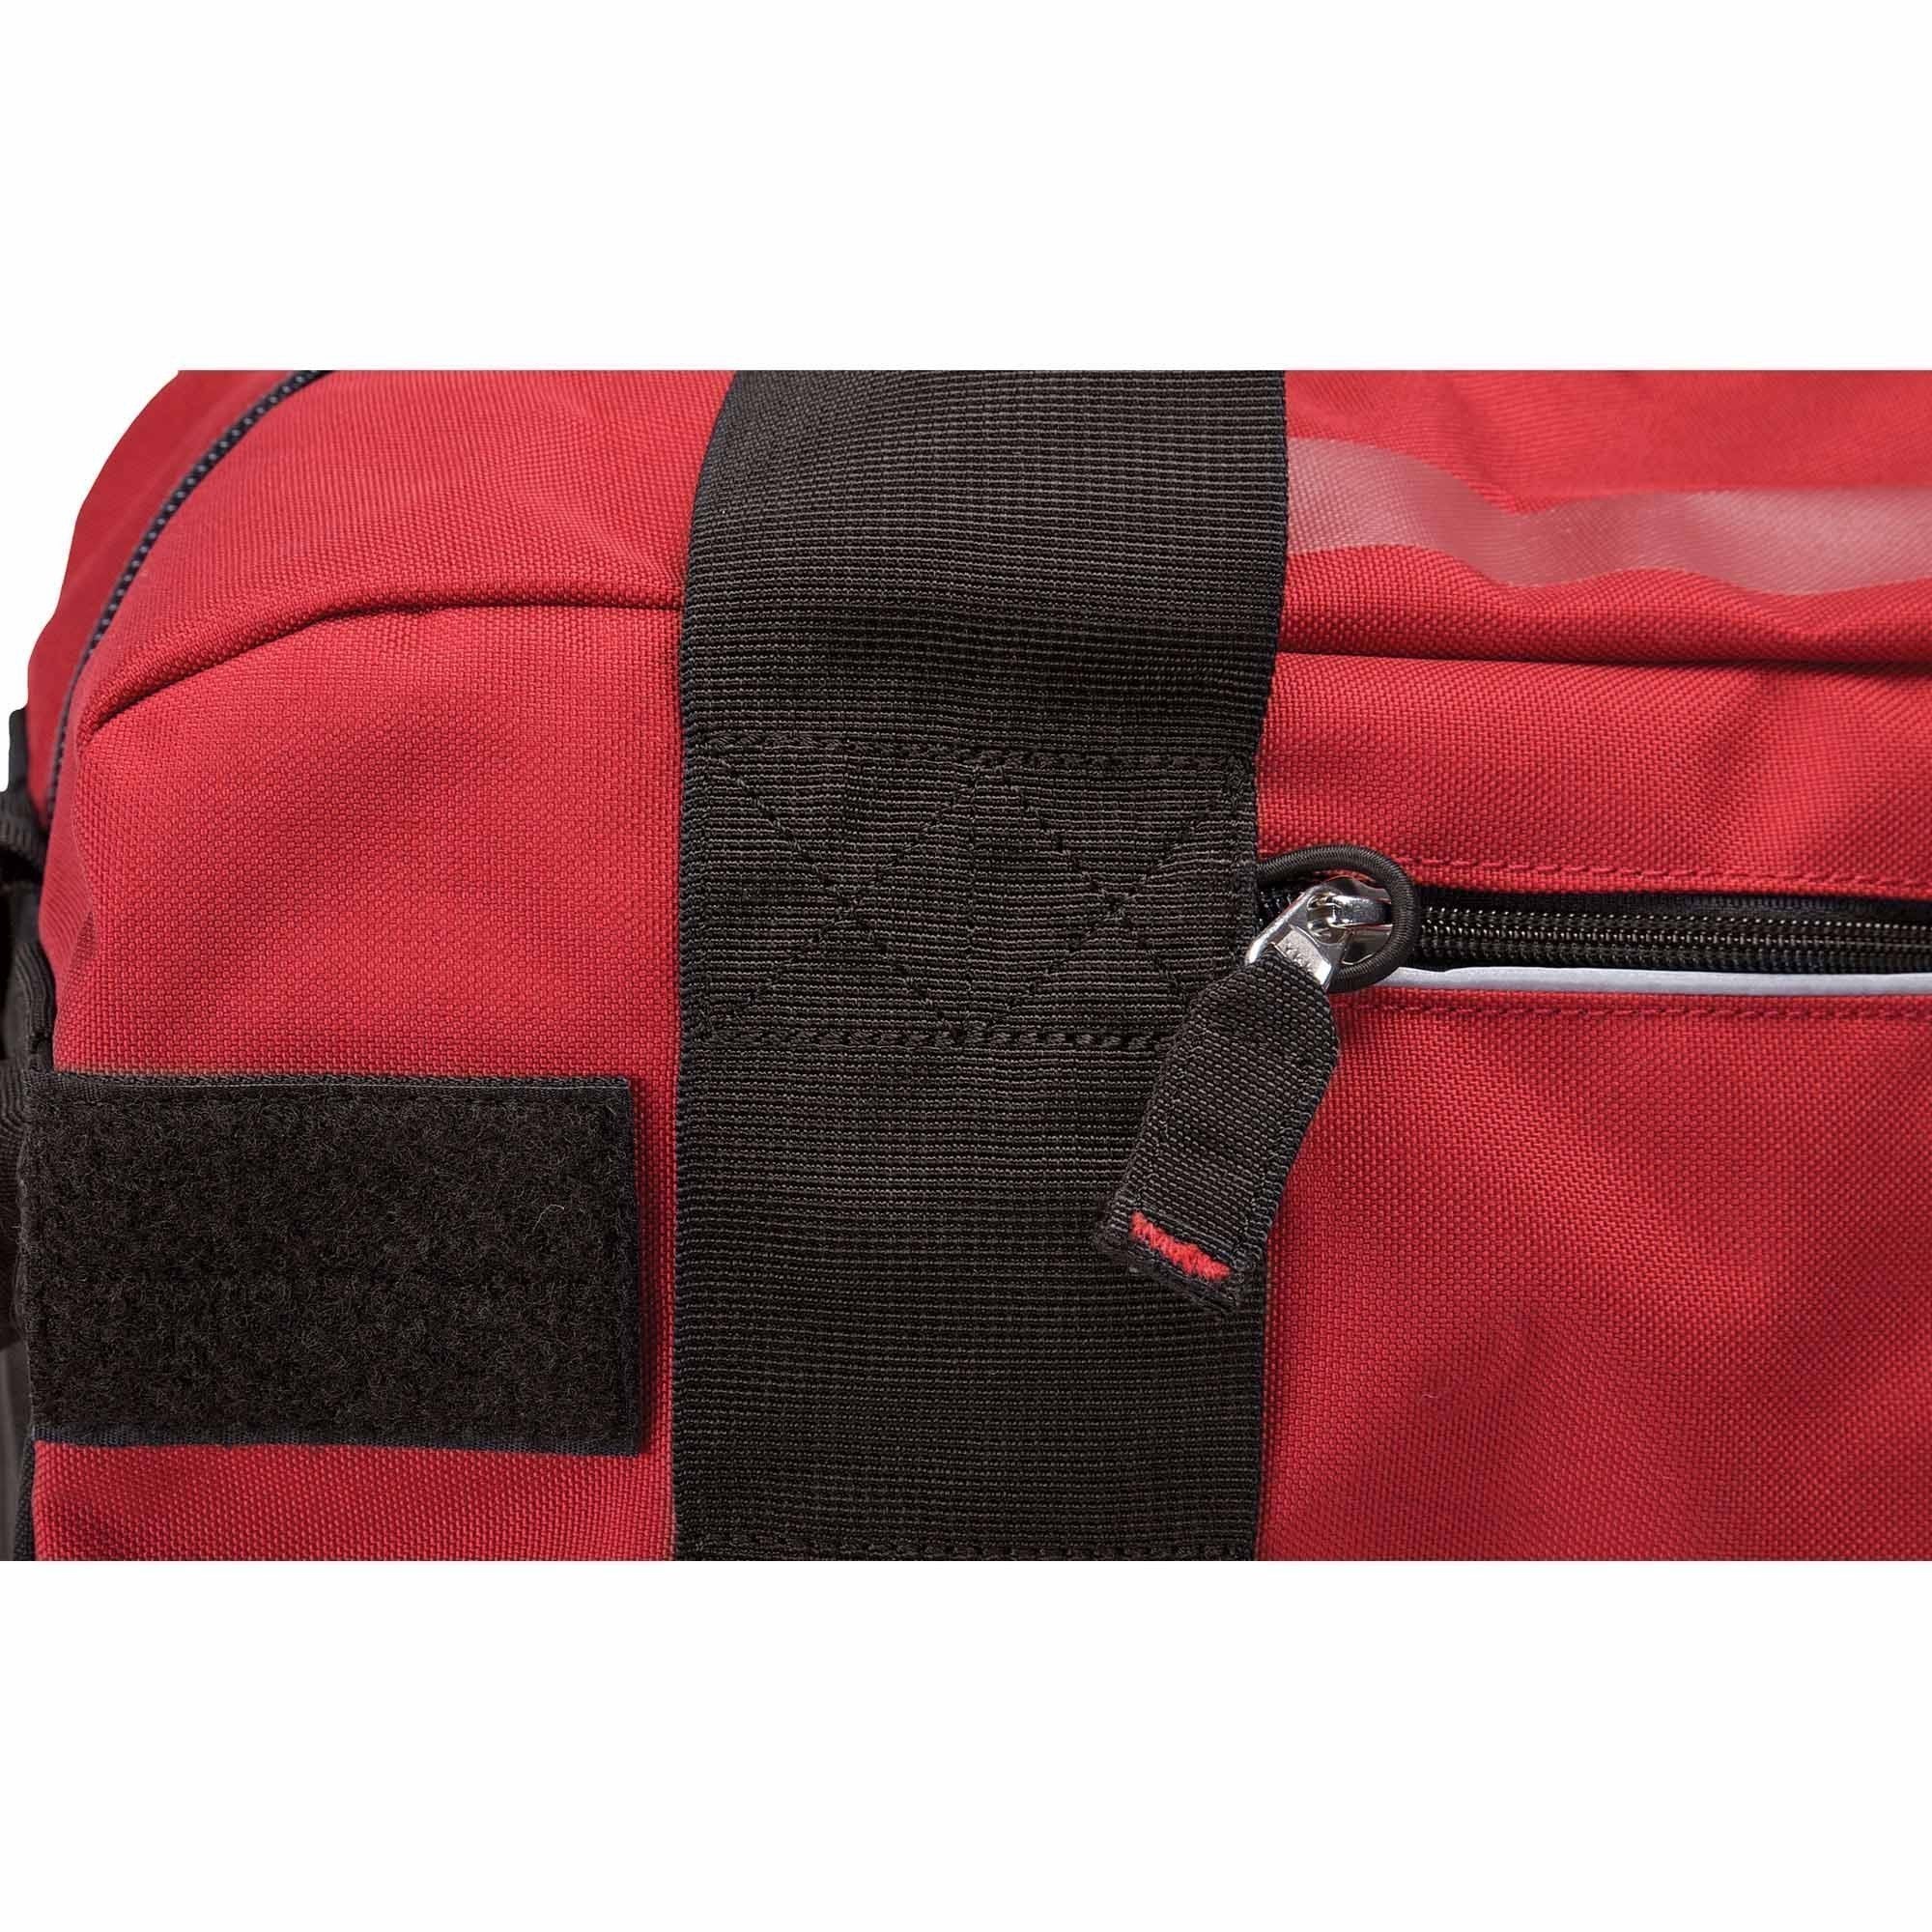 5.11 Tactical Red 8100 Fire Bag Bags, Packs and Cases 5.11 Tactical Tactical Gear Supplier Tactical Distributors Australia